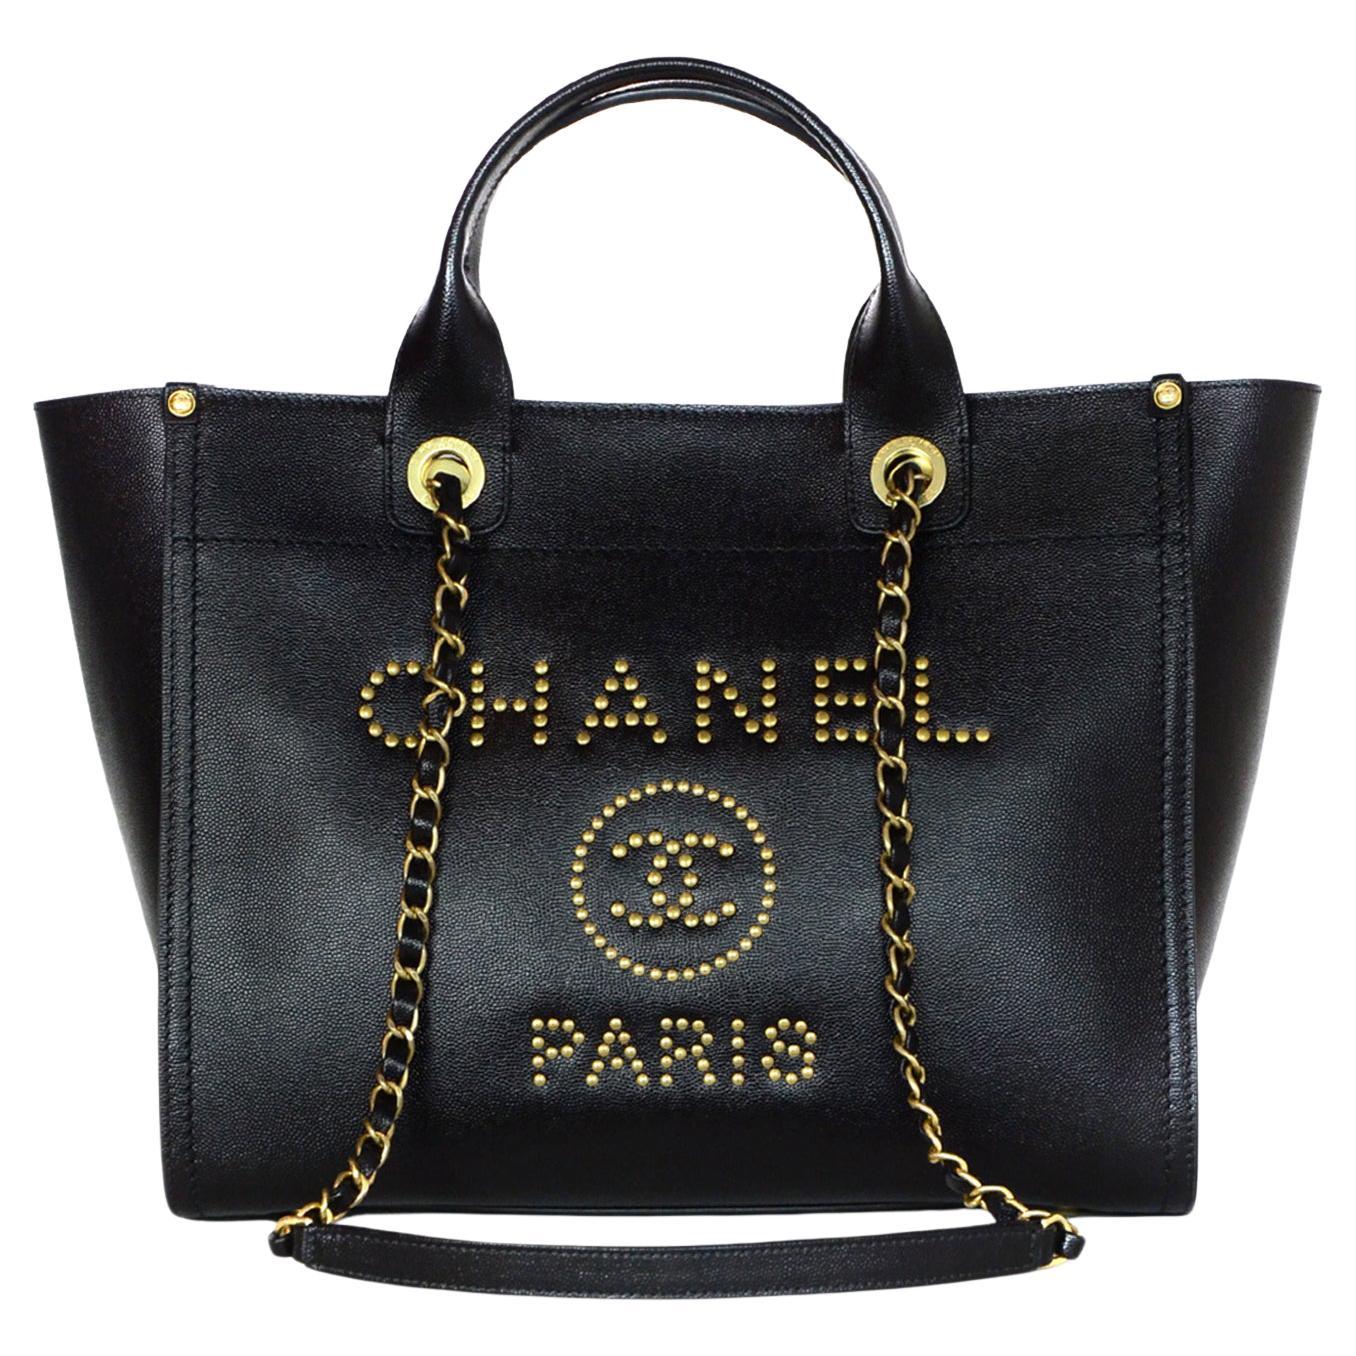 Deauville leather handbag Chanel Black in Leather - 32352365